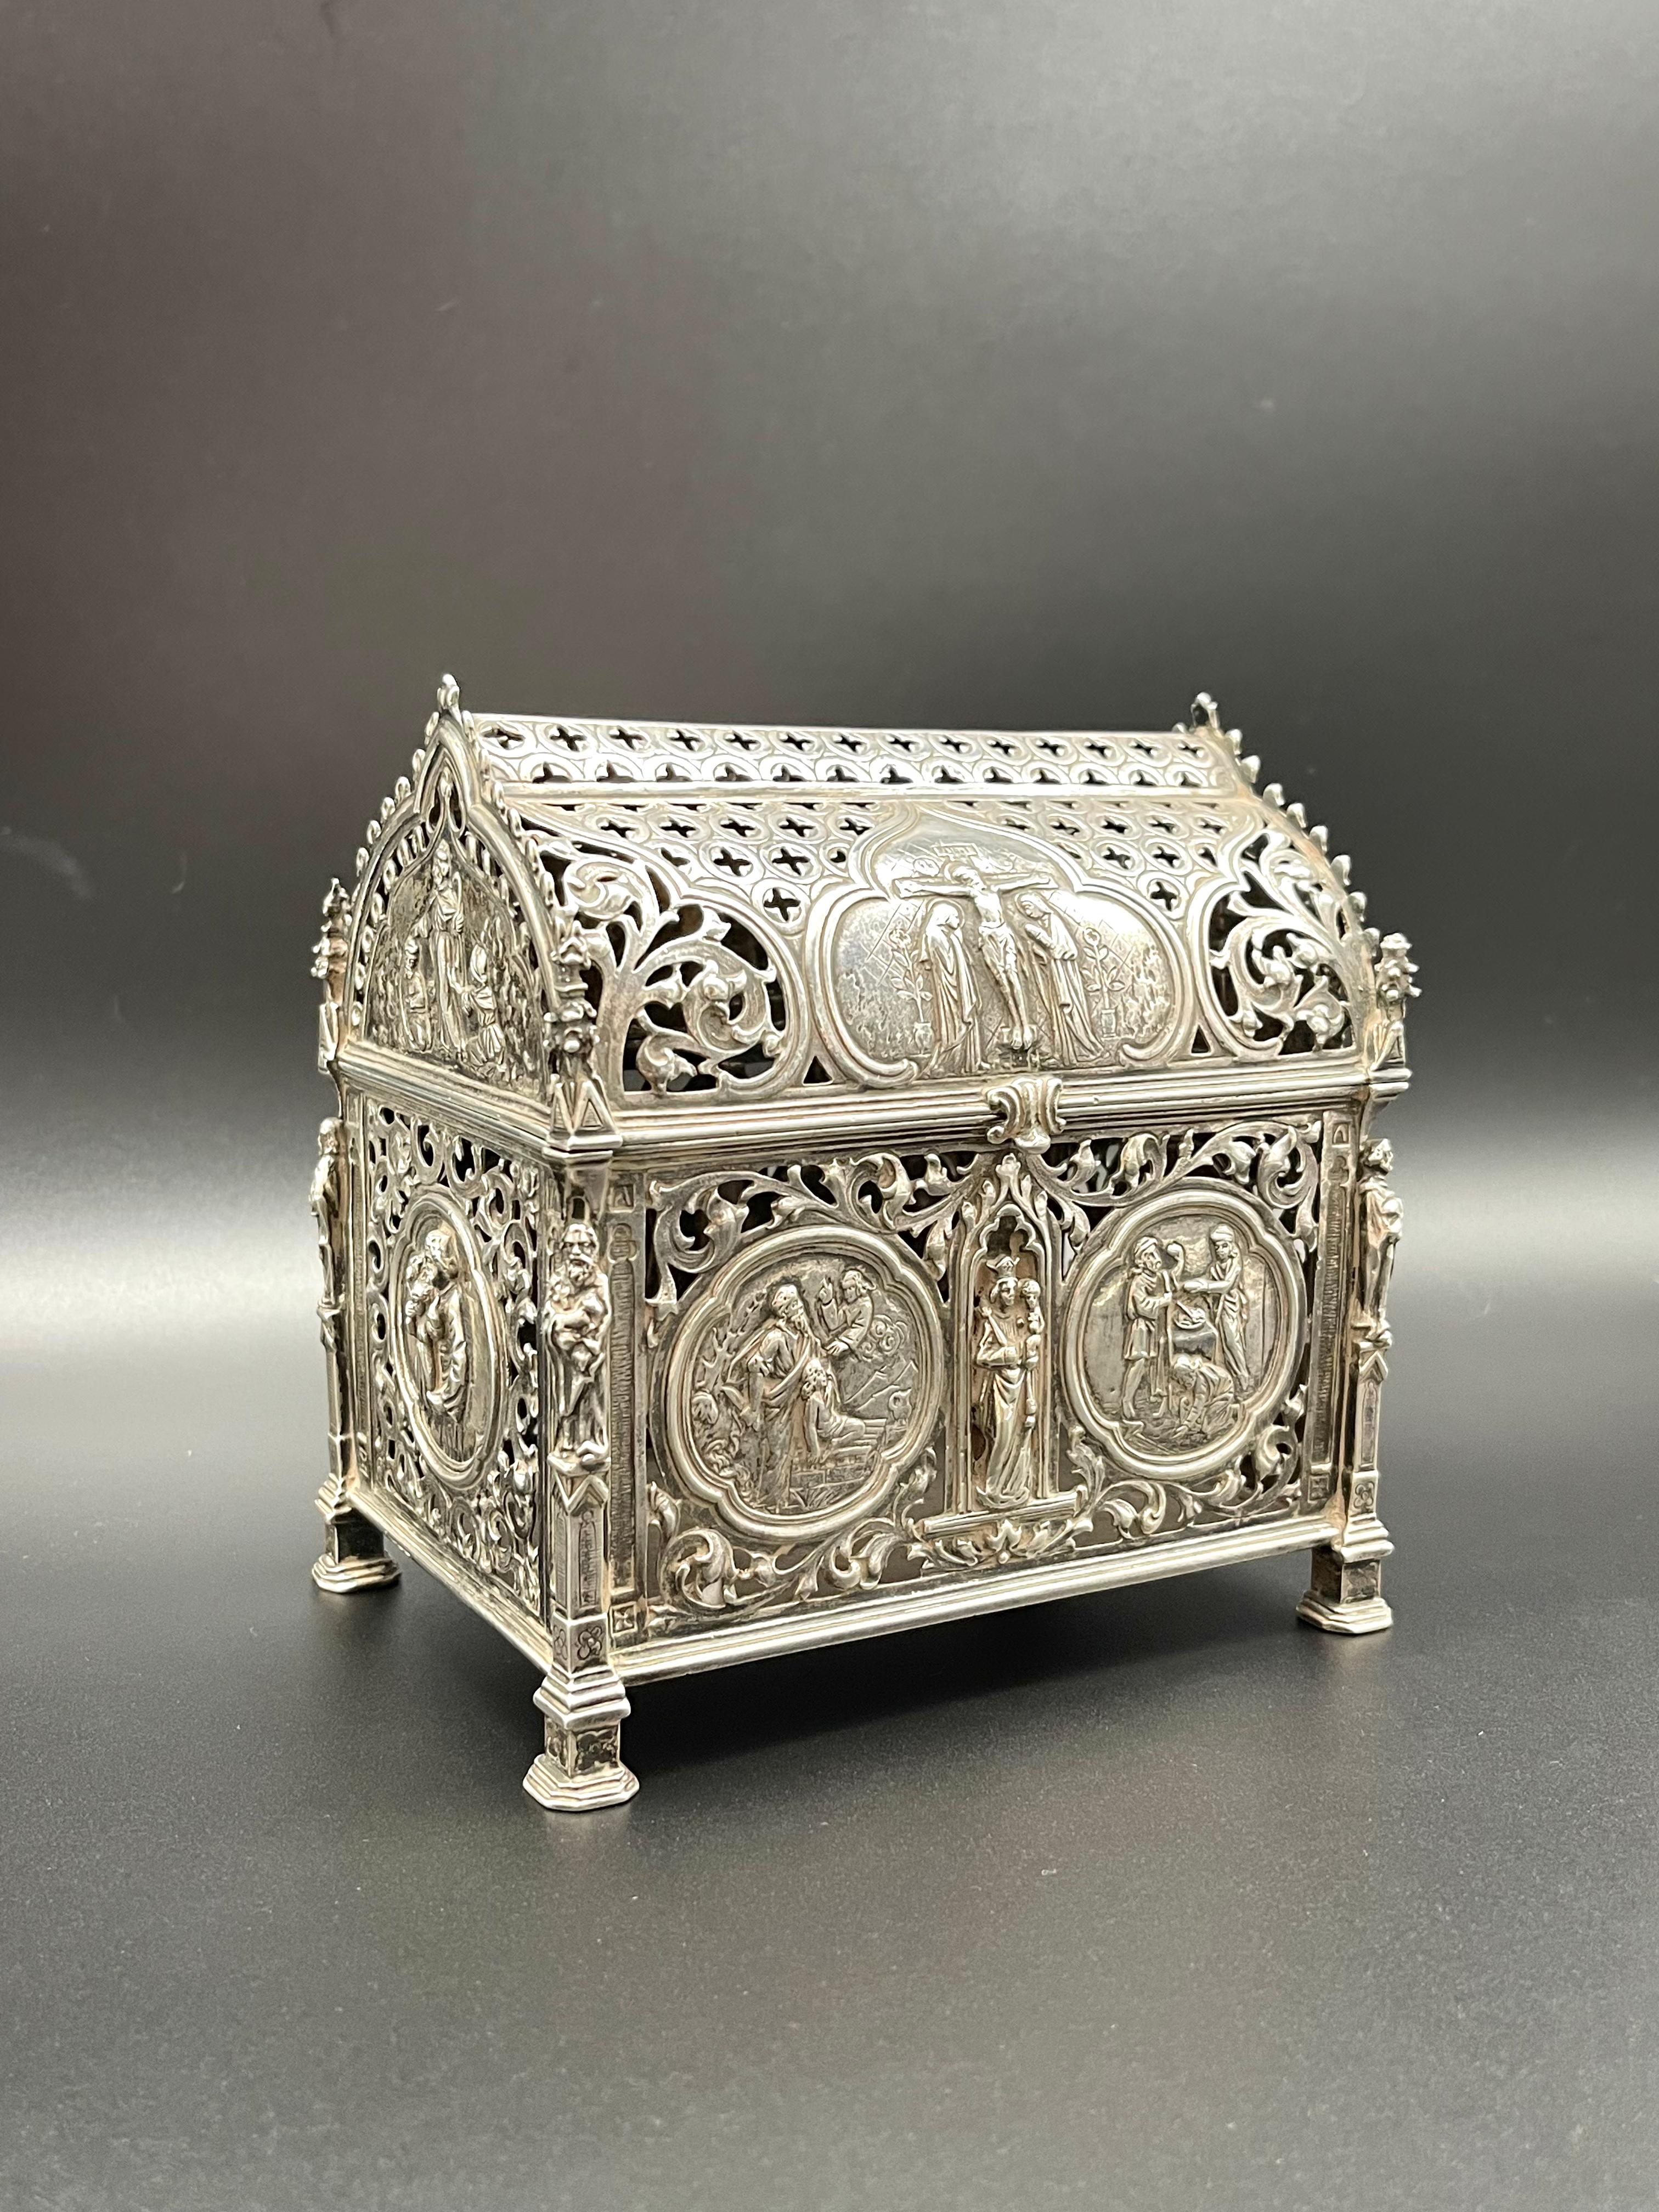 A Magnificent, fine and impressive Silver Reliquary Casket made by the Famous Neresheimer & Söhne with Representations of the life of Christ and Saints. An antique silver casket with hinged lid and decorative finial. 

A Stunning handcrafted